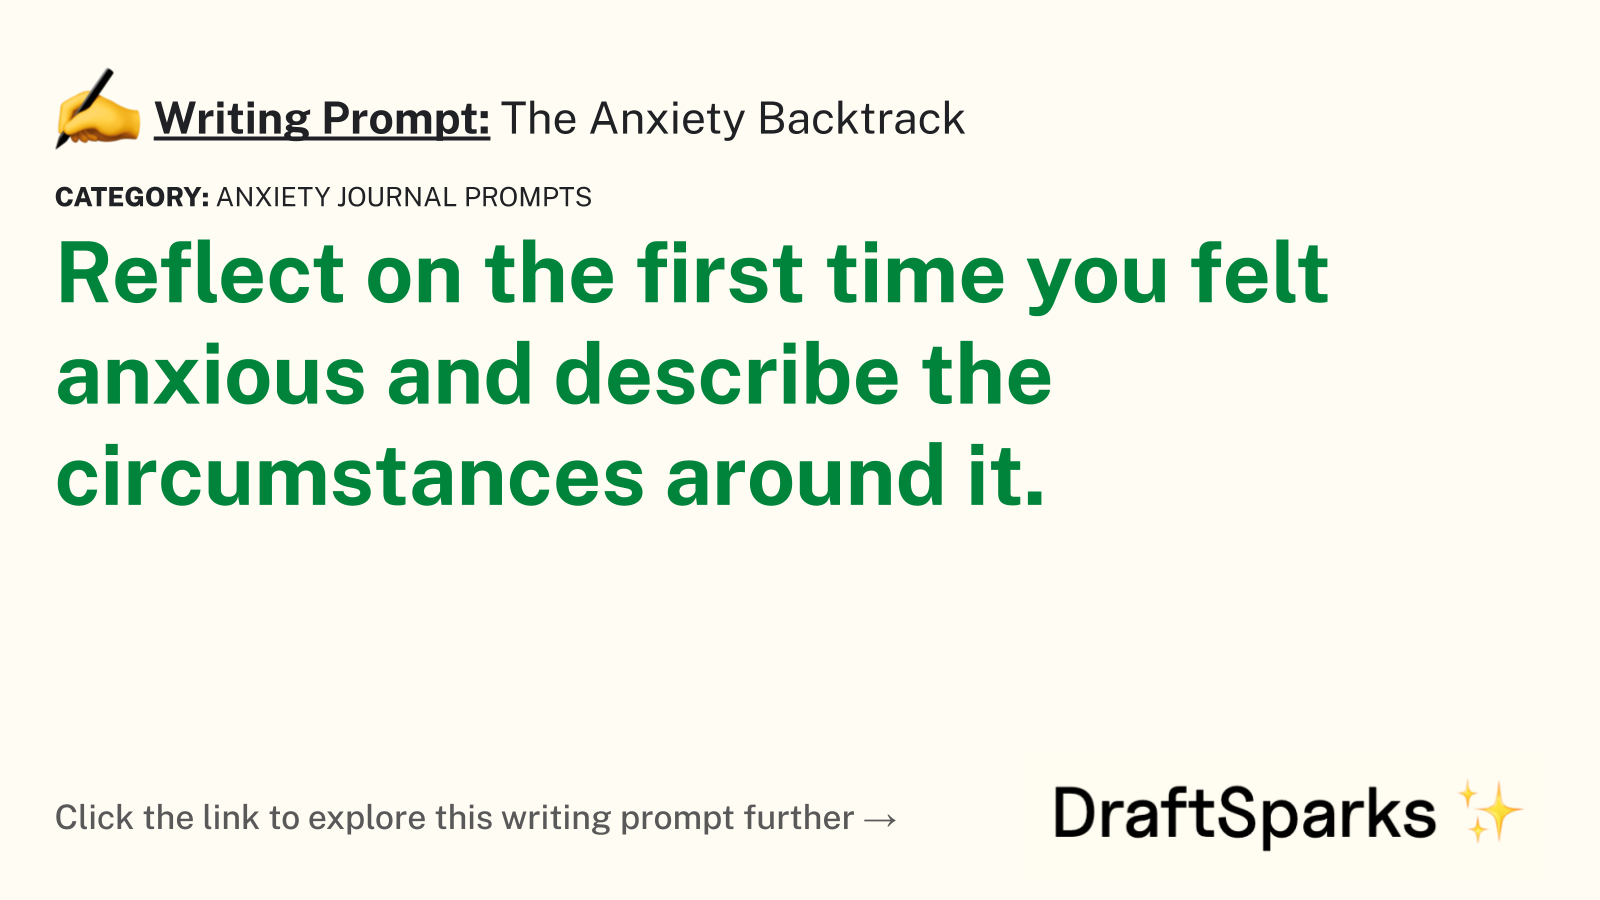 The Anxiety Backtrack